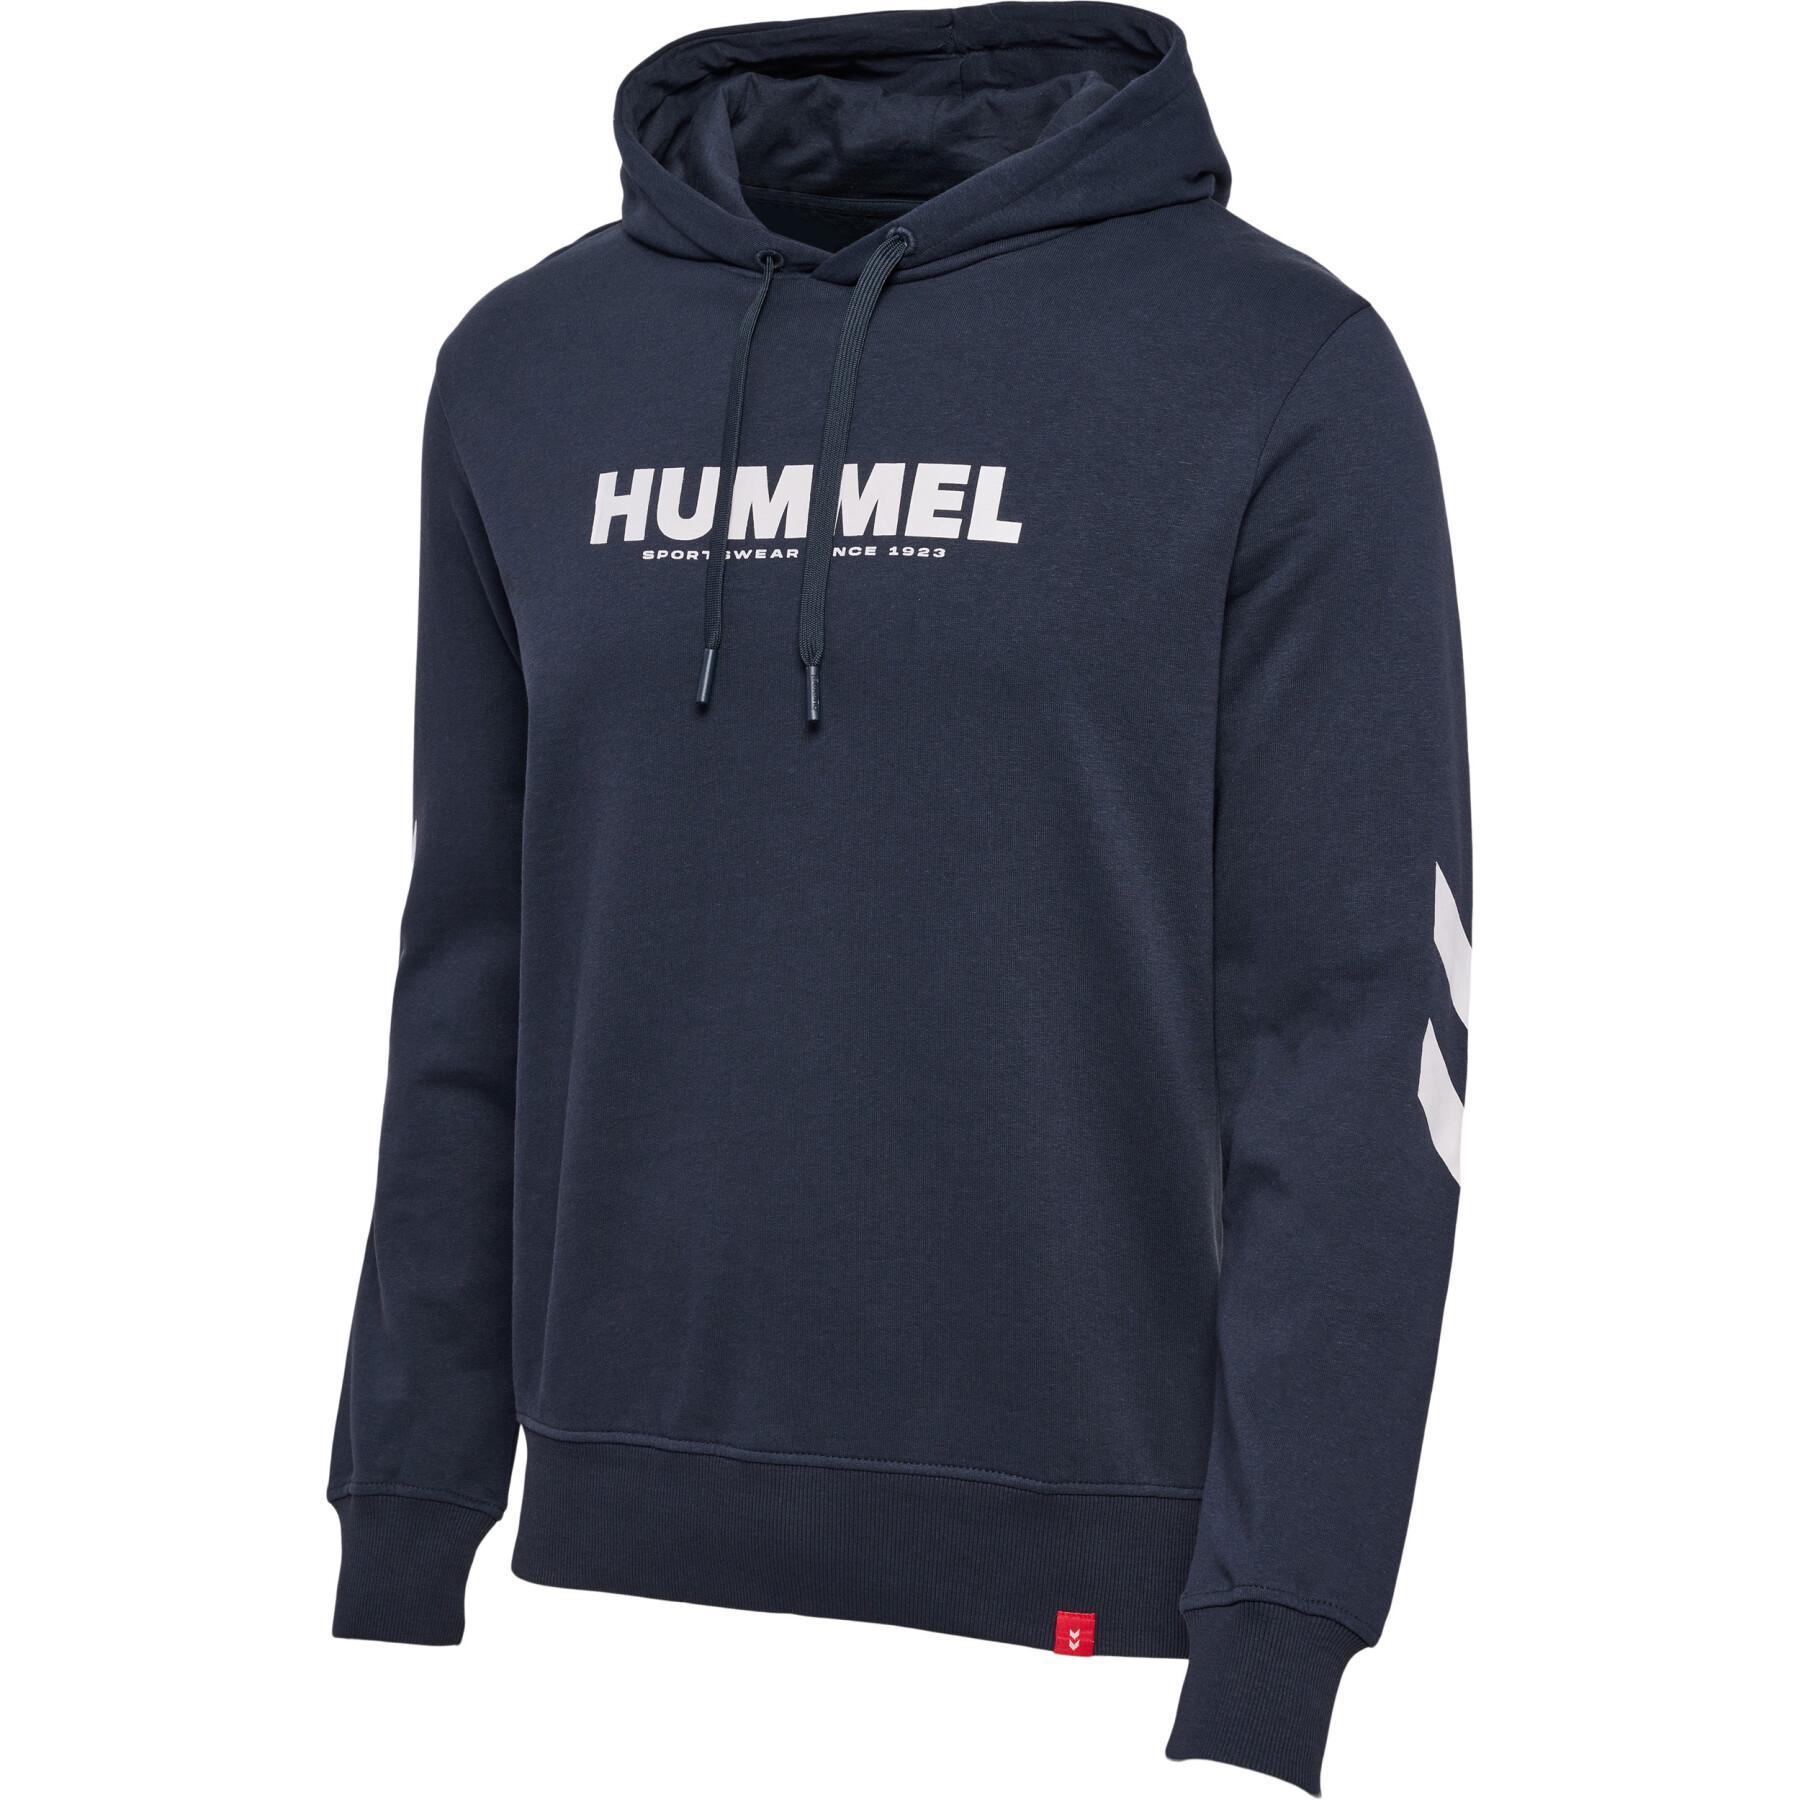 https://media.direct-volley.es/catalog/product/cache/image/1800x/9df78eab33525d08d6e5fb8d27136e95/h/u/hummel_214172-7429_0.jpg